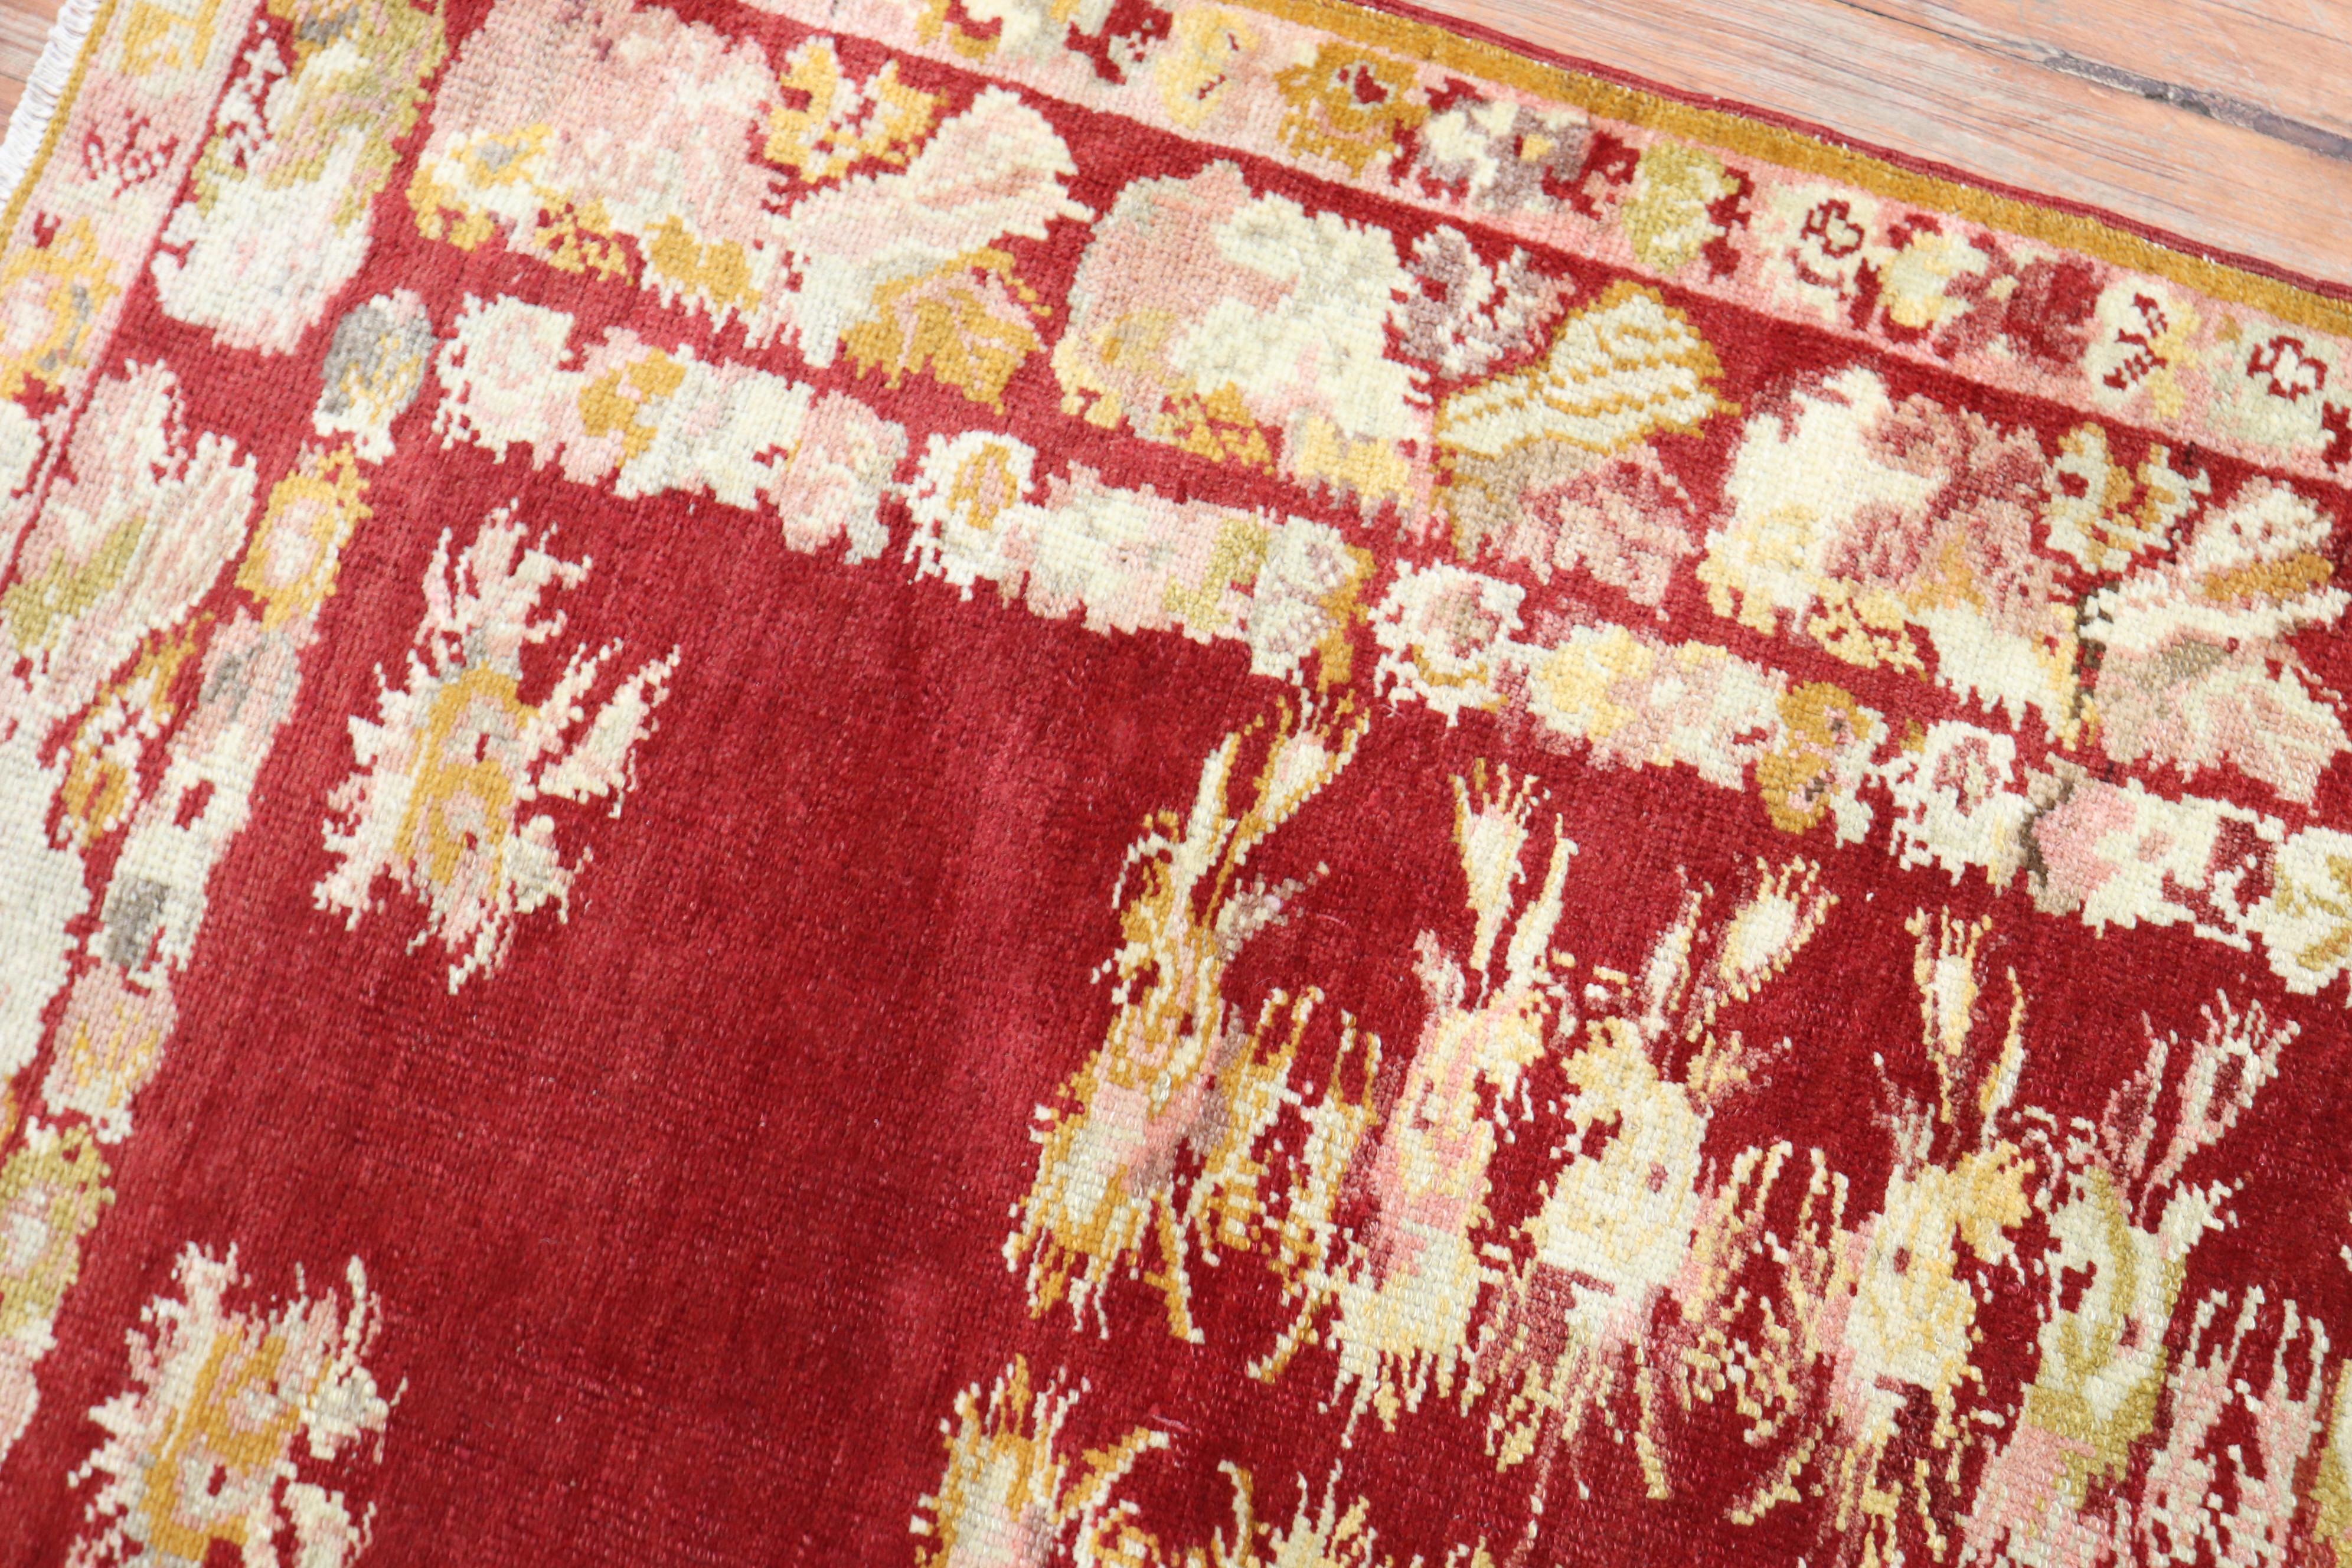 Cherry Red Antique Turkish Melas Rug, Early 20th Century For Sale 1